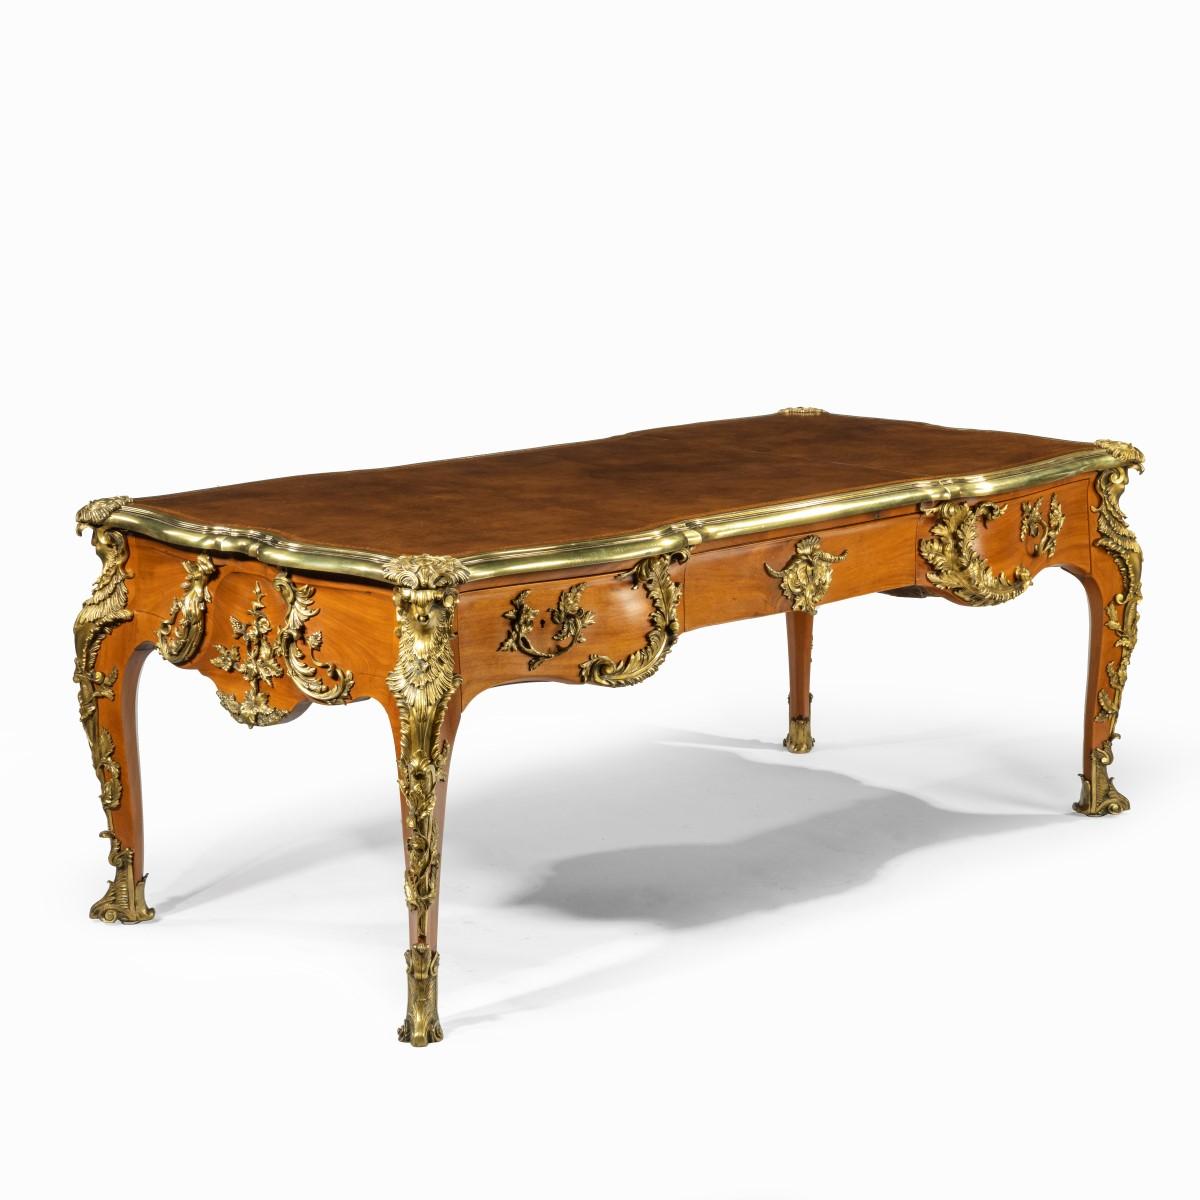 An outstanding Louis XV-style mahogany bureau plat after a model by Jacques B. Dubois, from the estate of Phyllis McGuire, the shaped leather-inset top above an elaborate frieze with three disguised drawers, all on cabriole legs, the whole